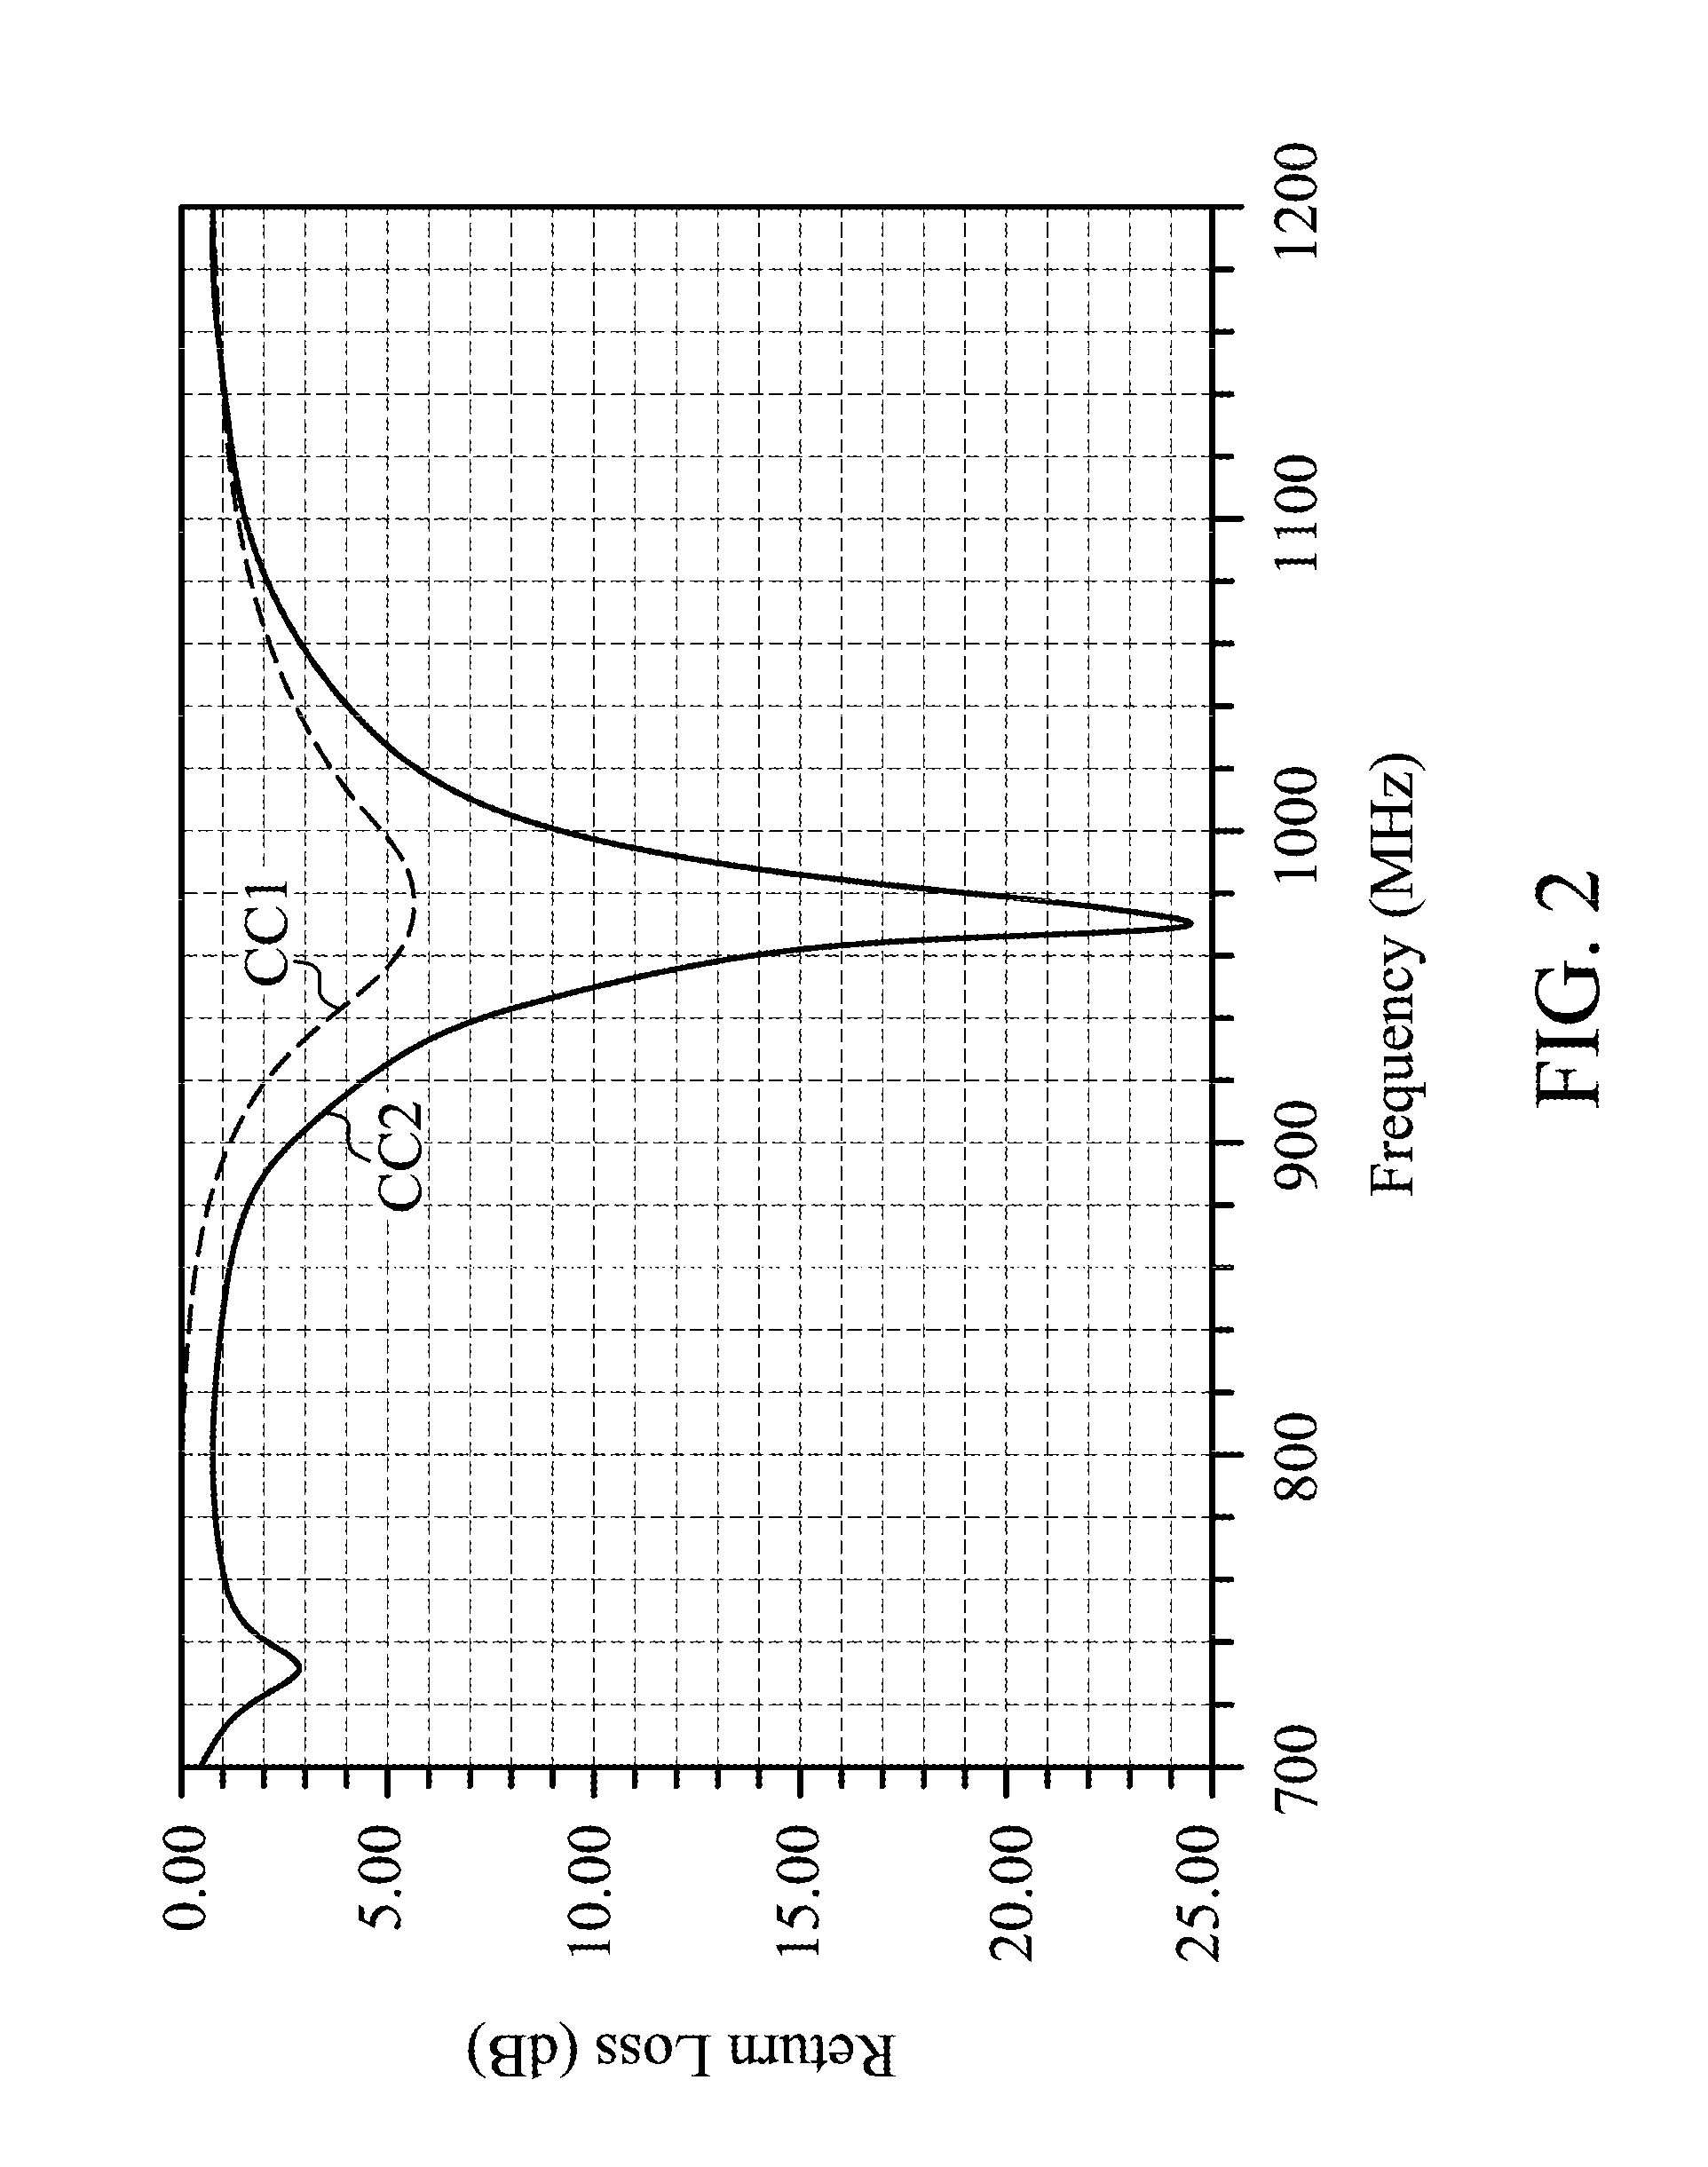 Directional antenna structure with dipole antenna element